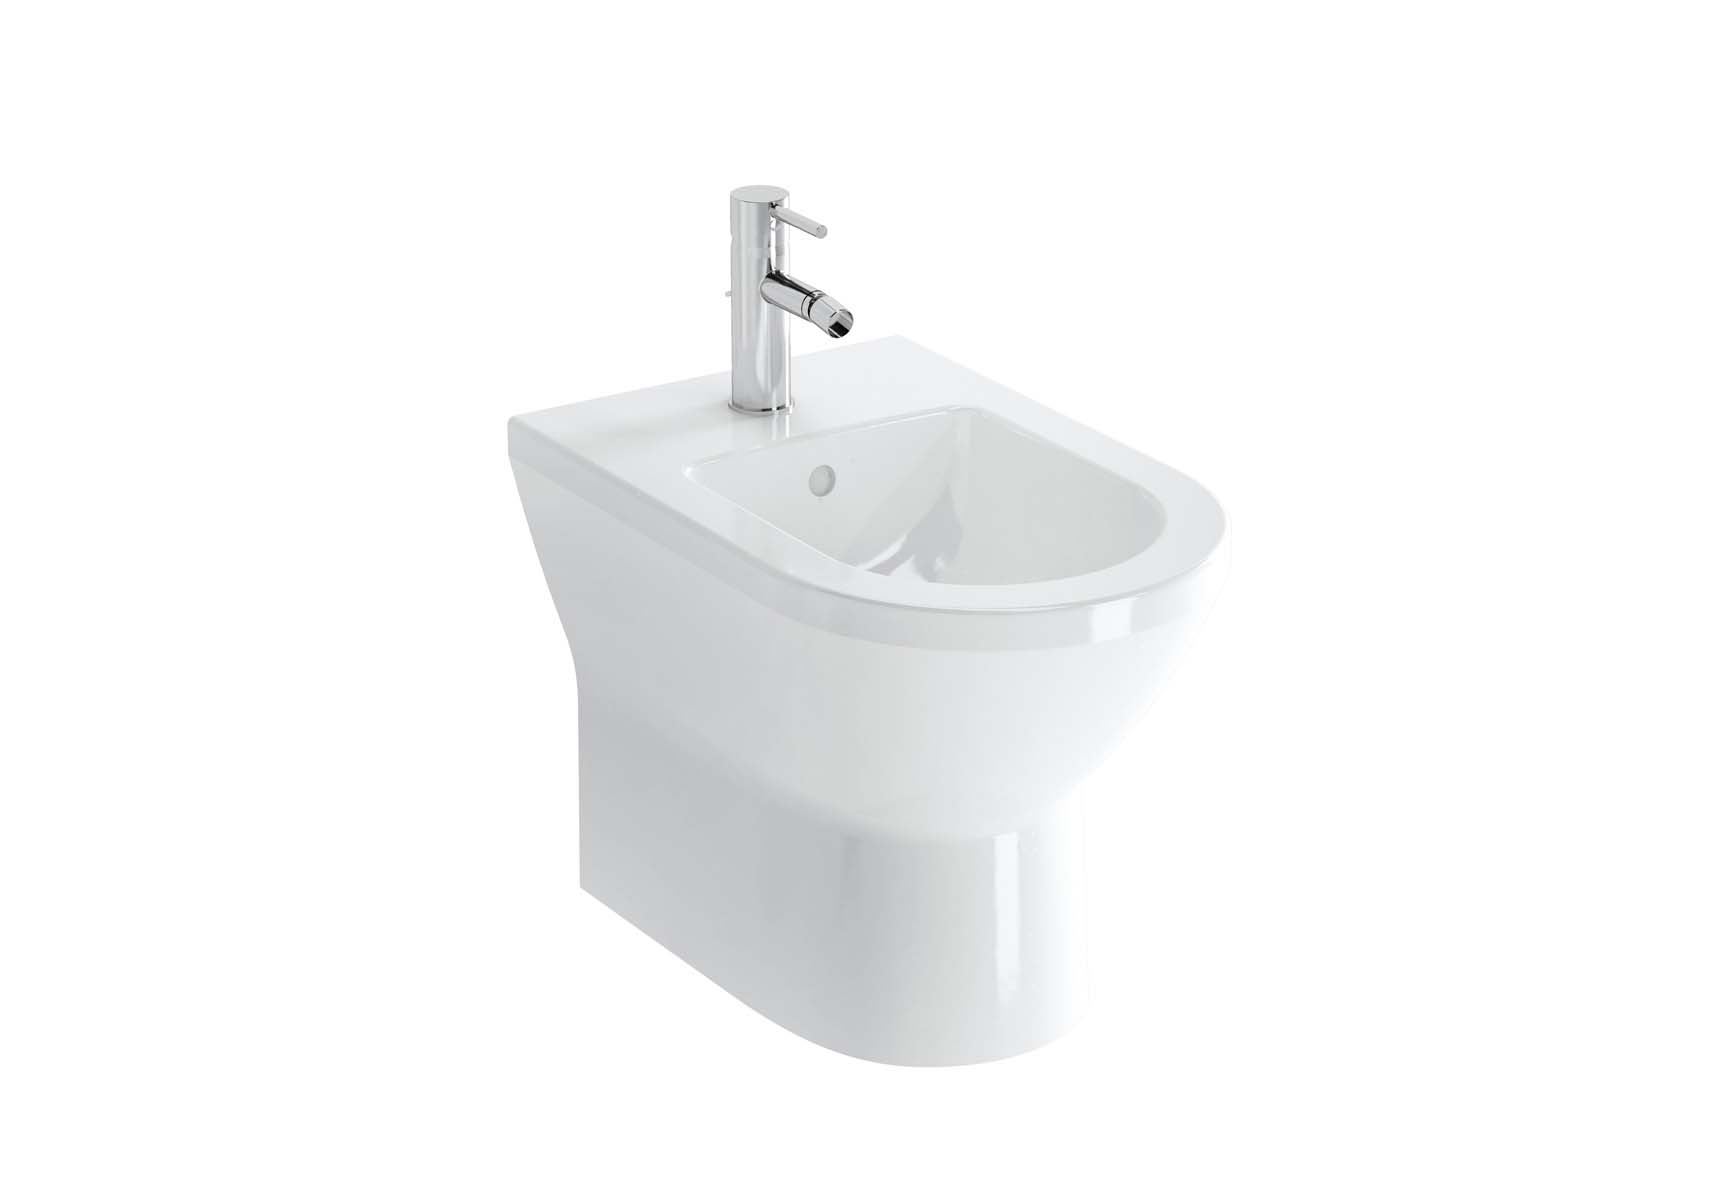 Floor Standing Bidet, Back-To-Wall, 54 cm, One Tap Hole, With Side Holes